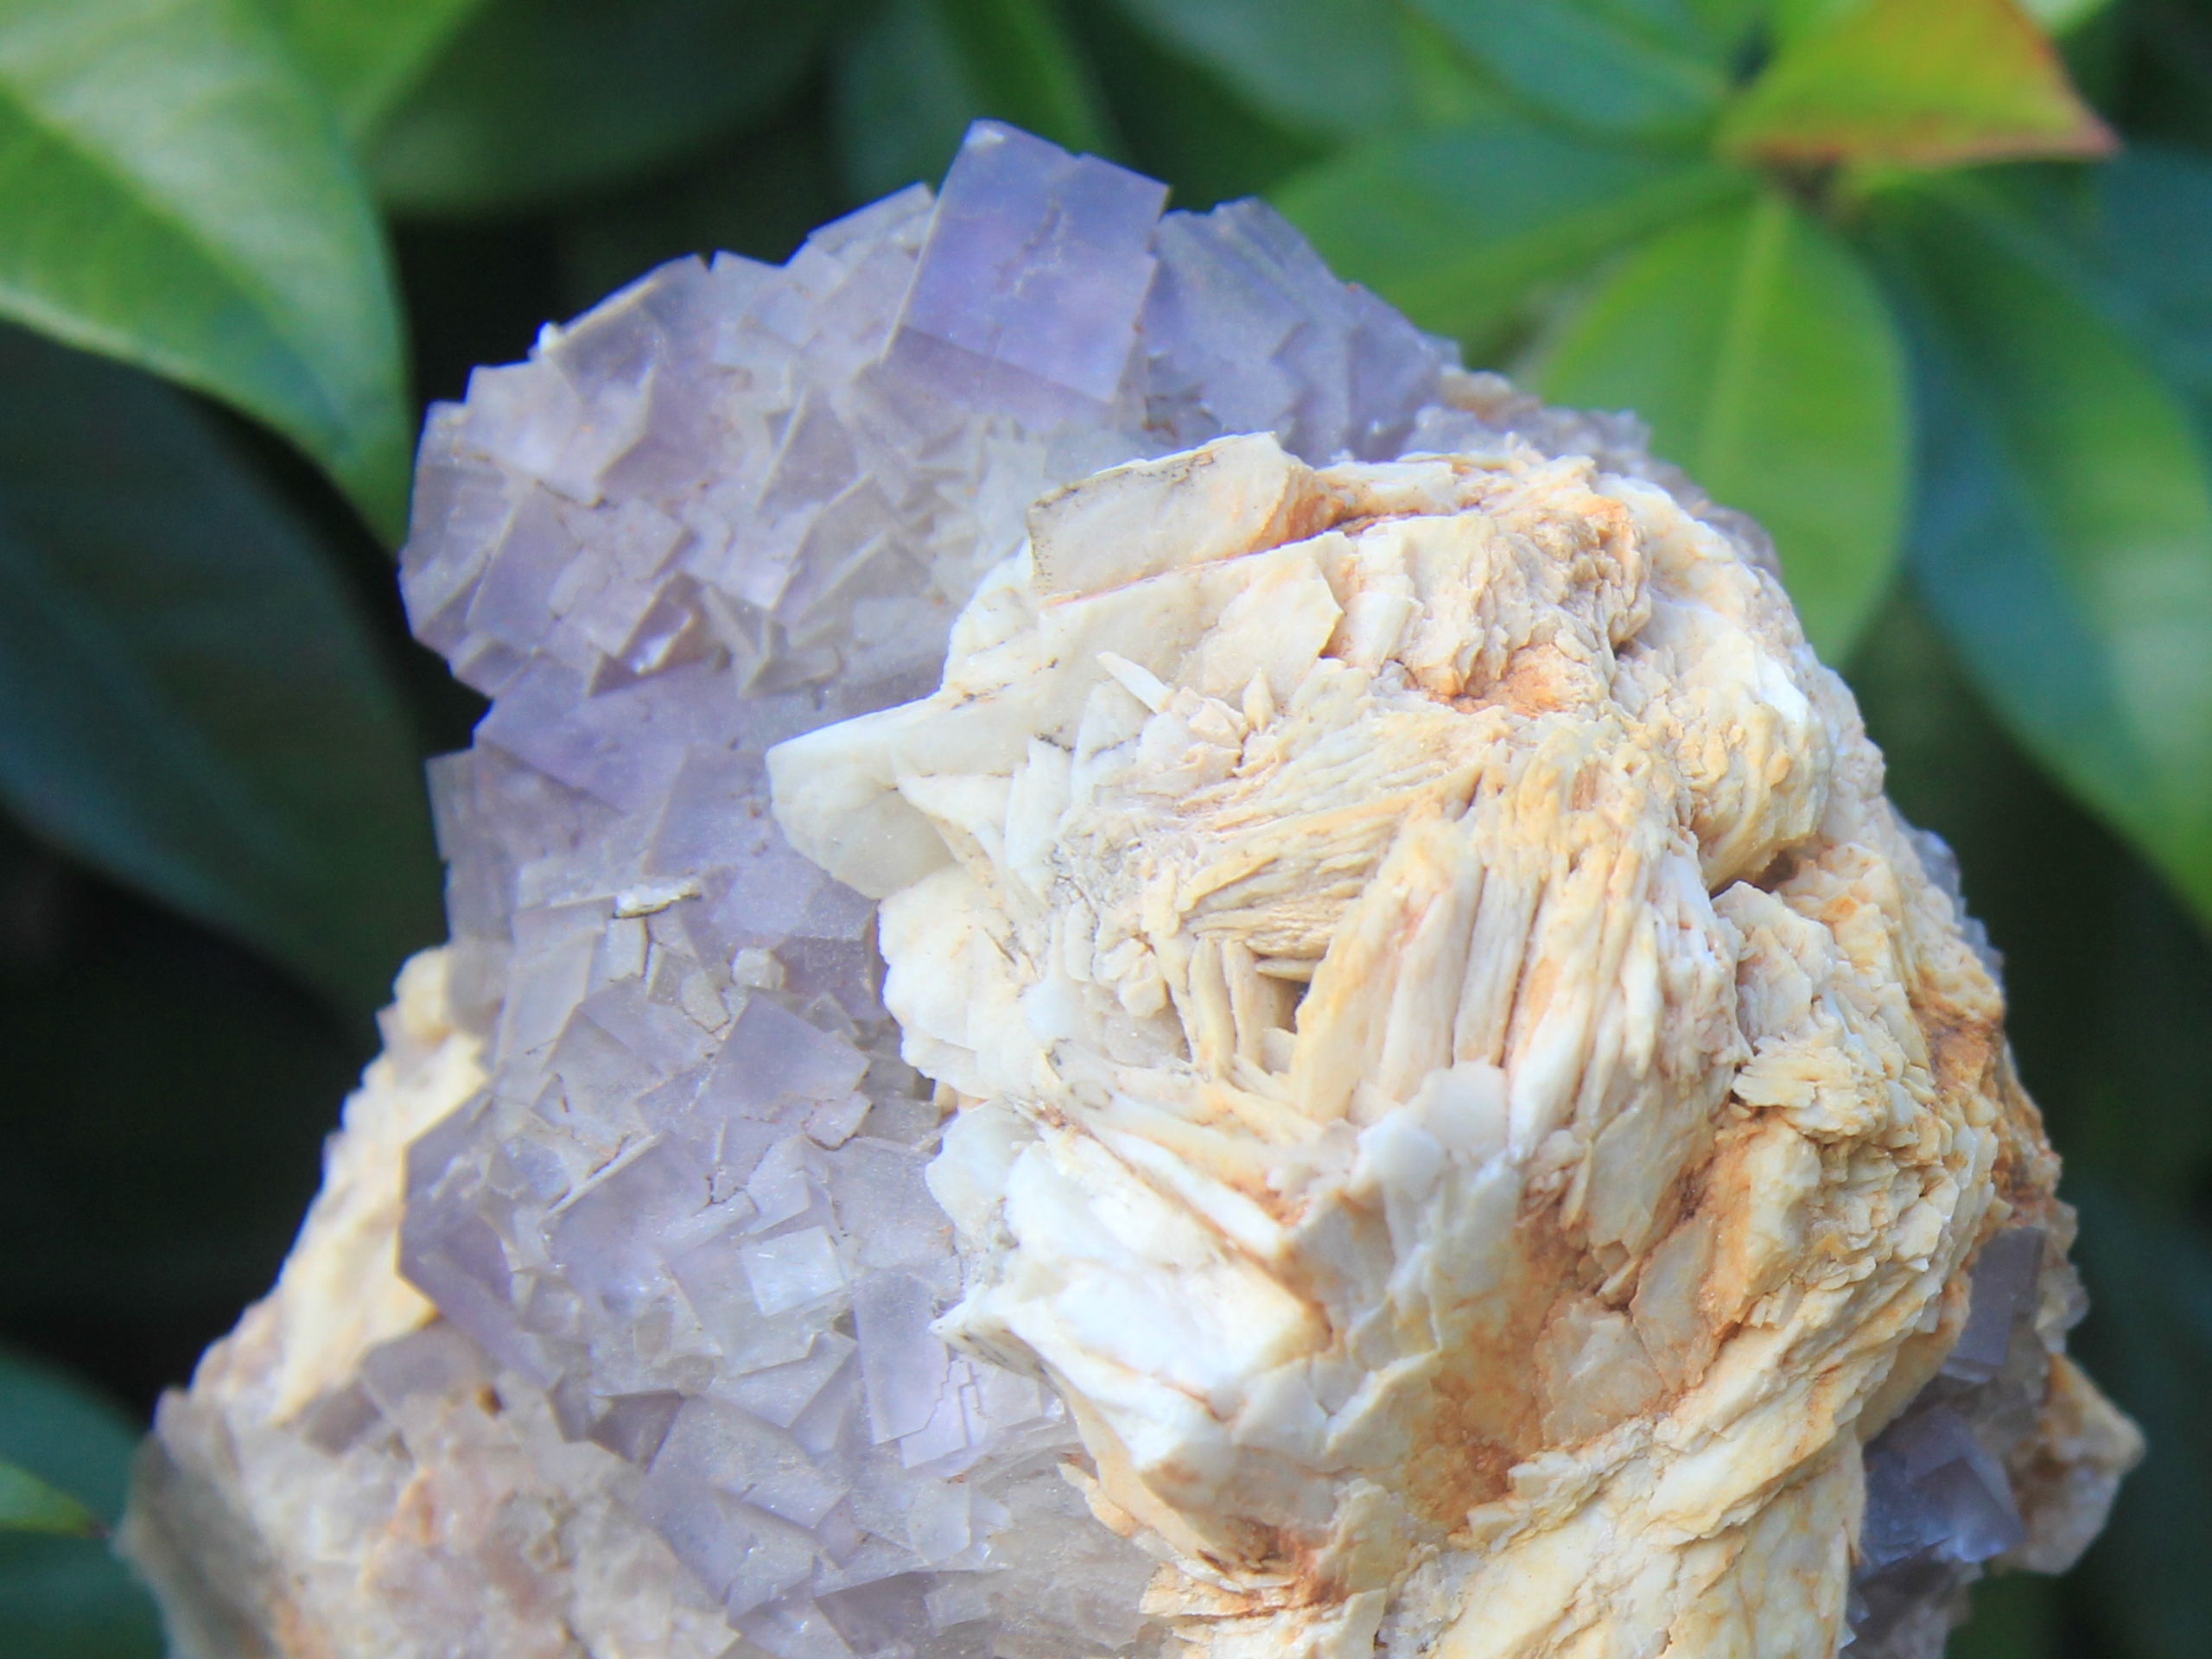 Fluorite and baryte